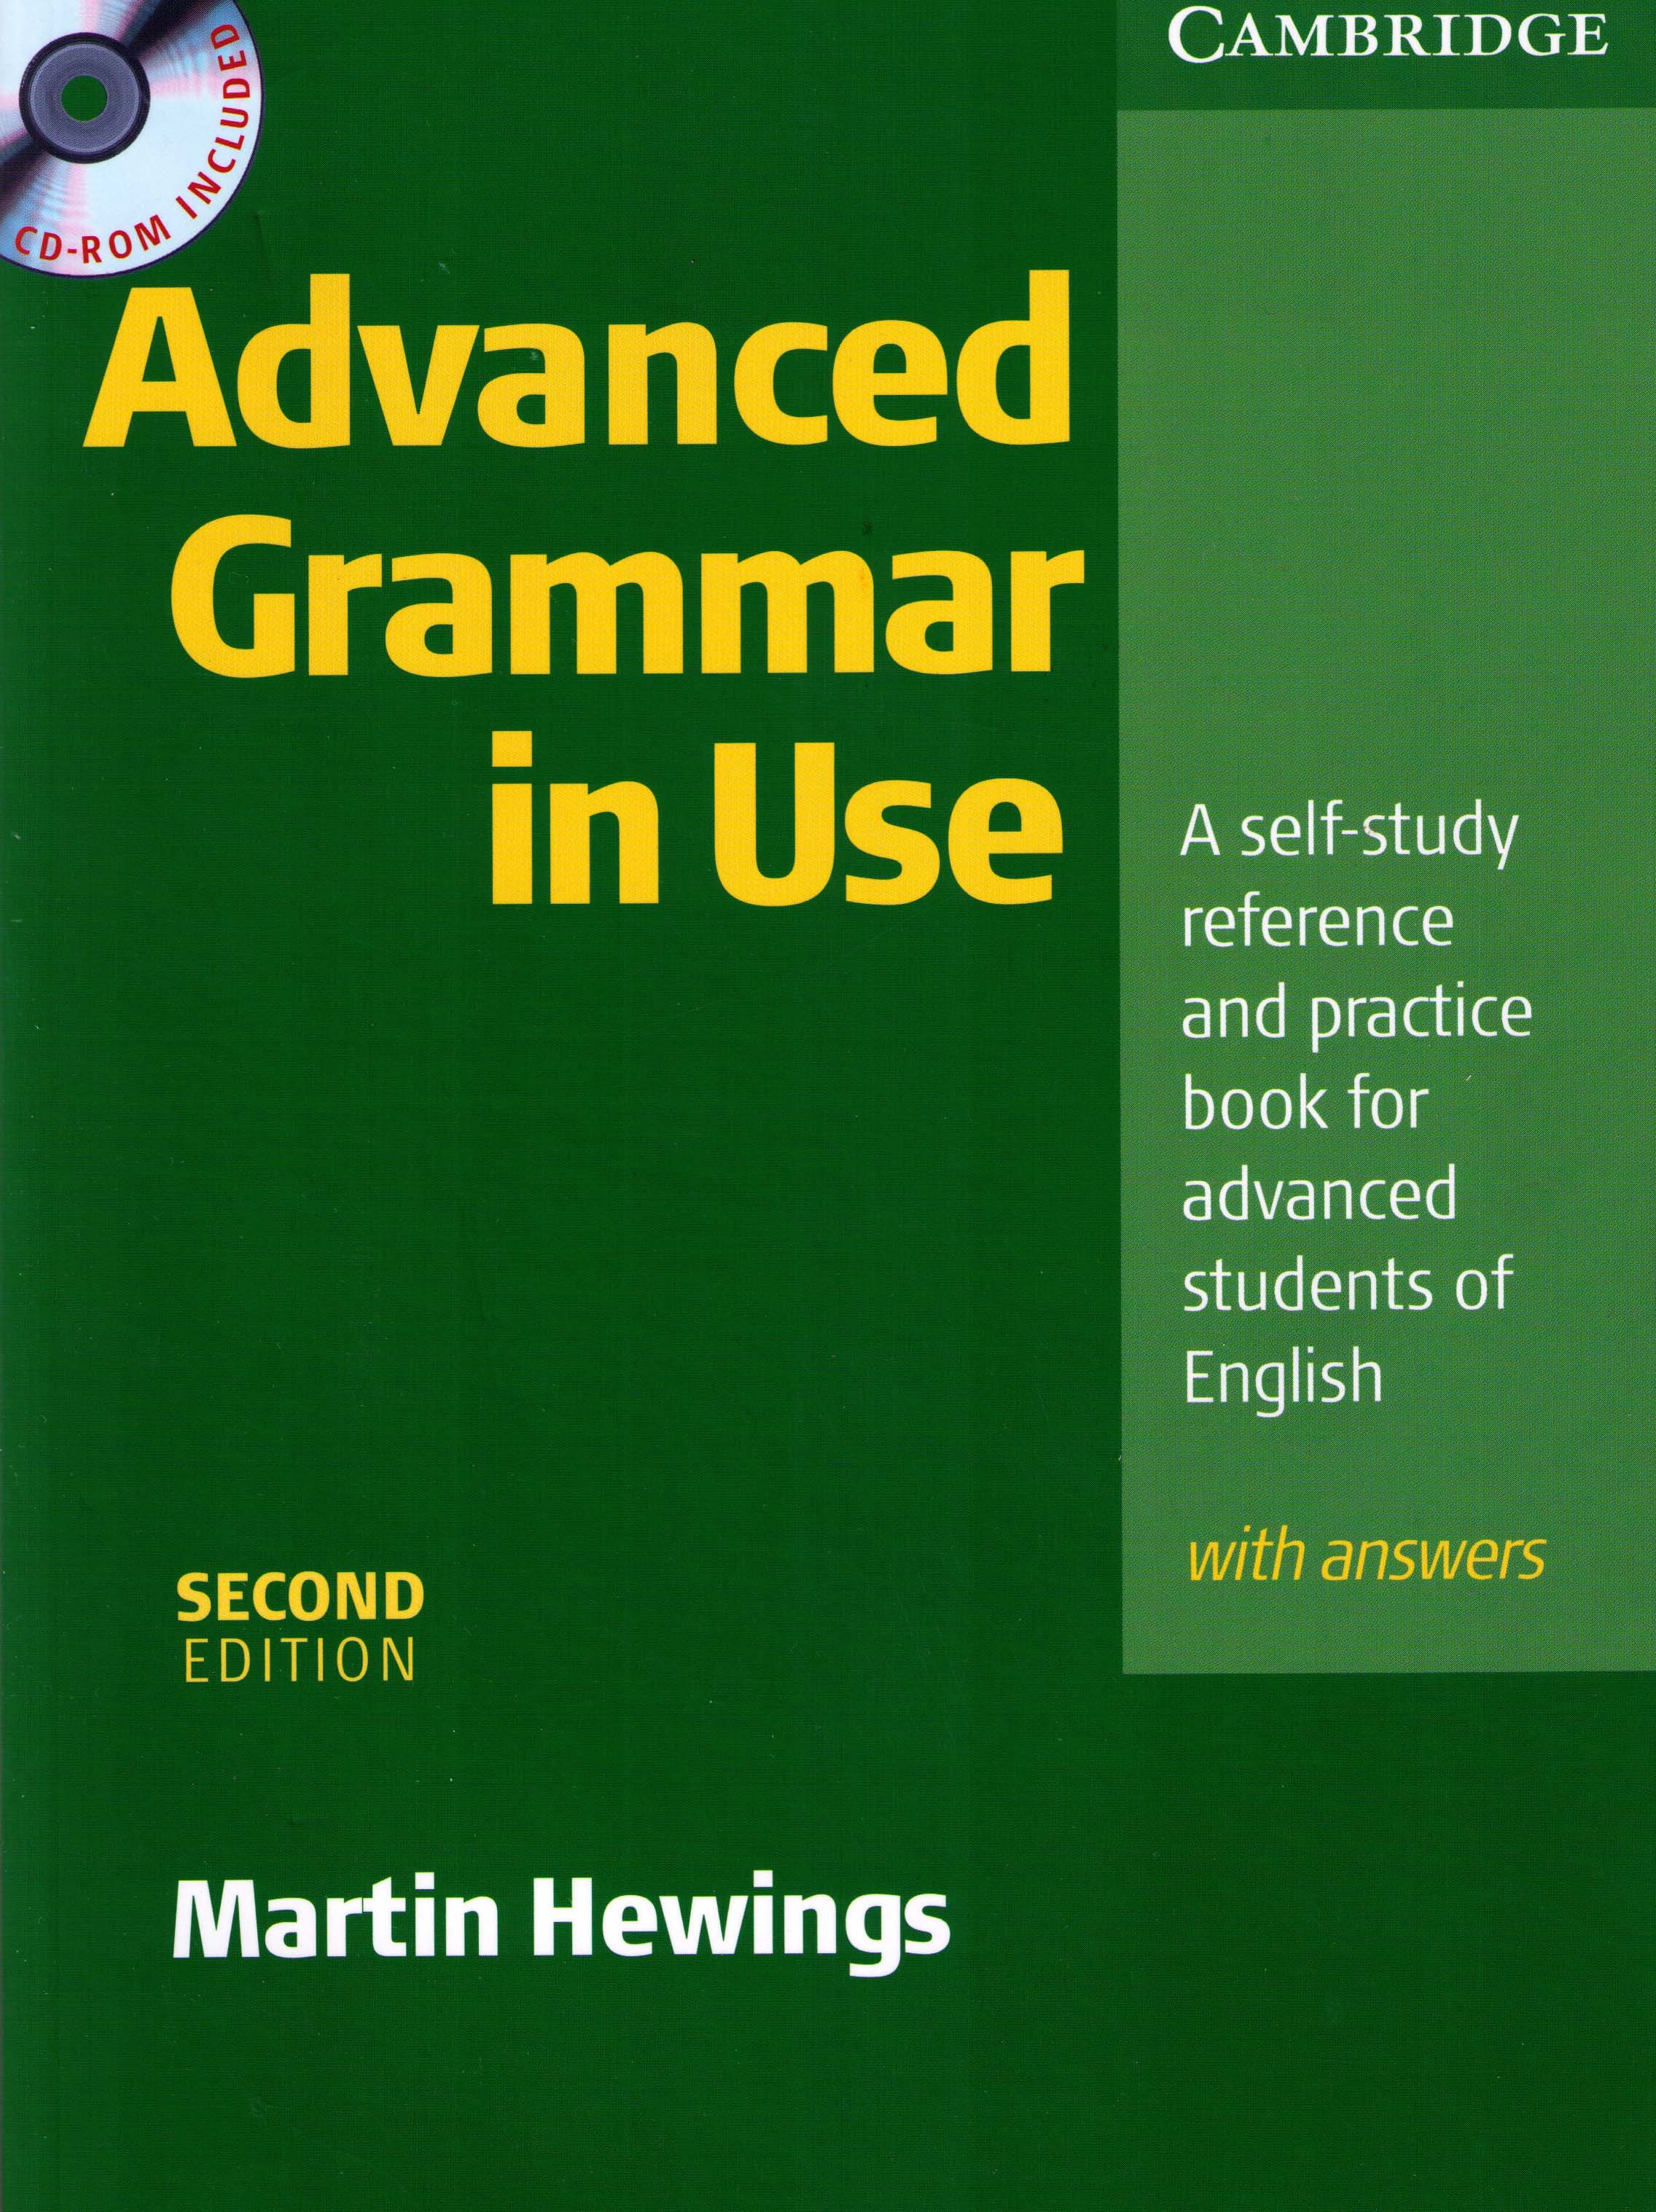 Advanced Grammar in Use: Martin Hewings: English Course ...